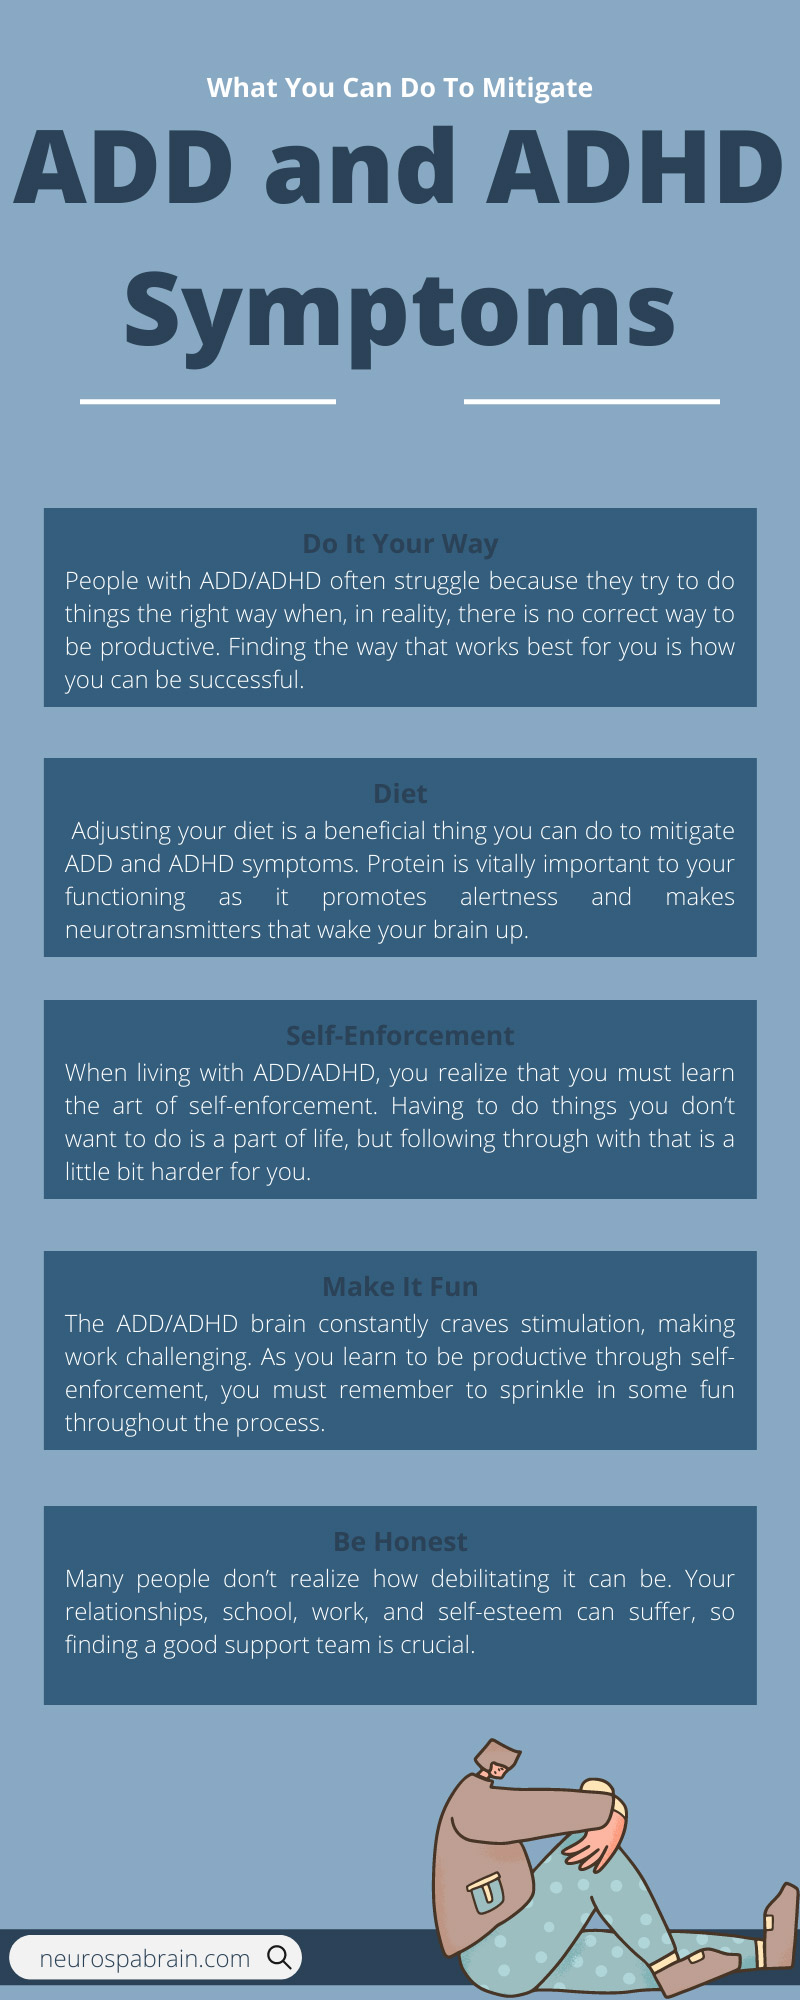 What You Can Do To Mitigate ADD and ADHD Symptoms